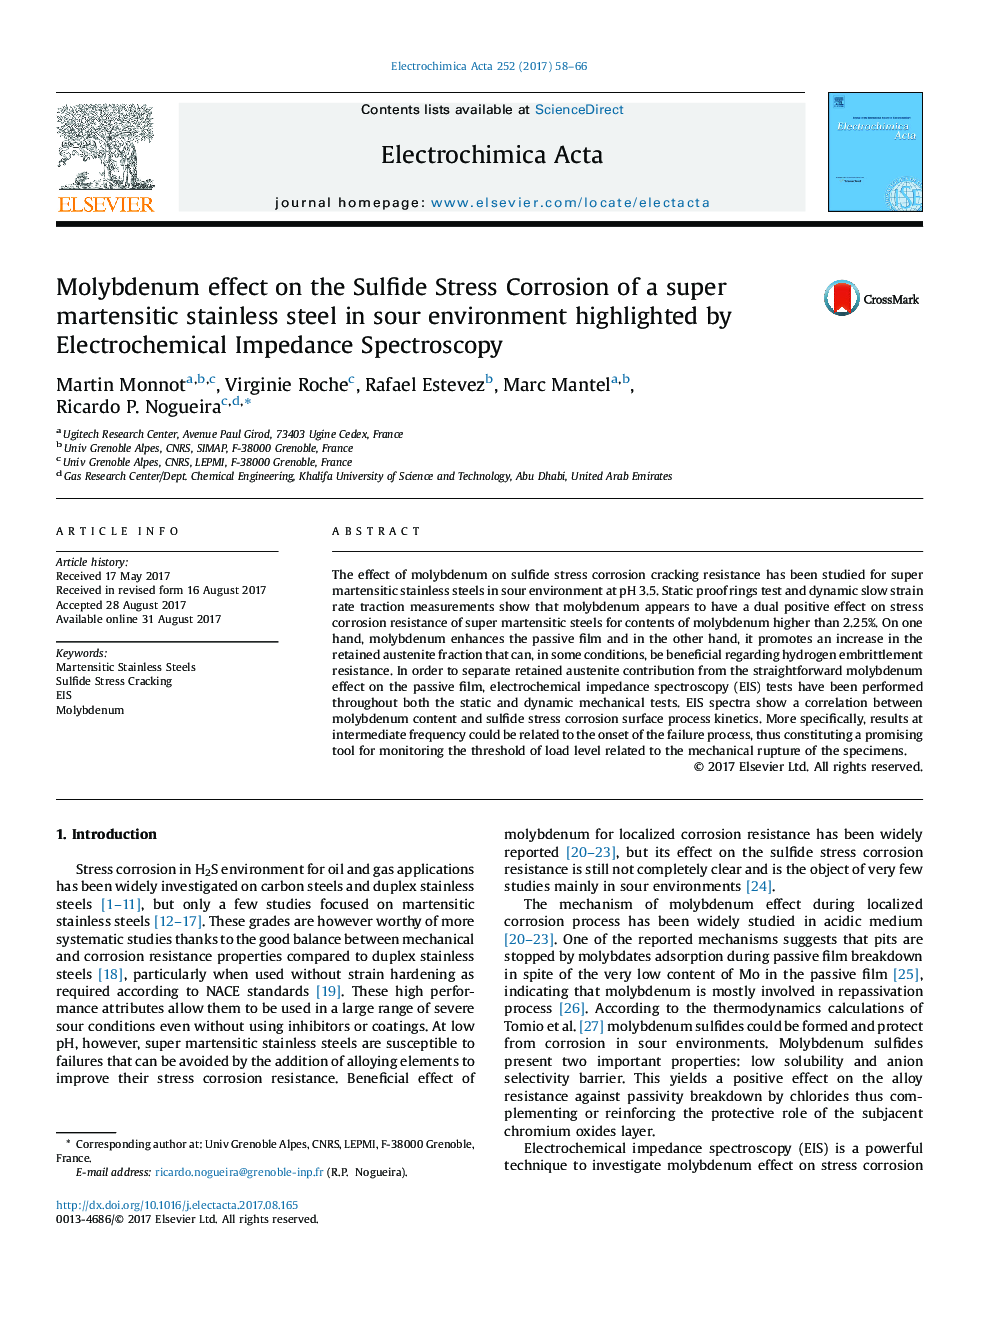 Molybdenum effect on the Sulfide Stress Corrosion of a super martensitic stainless steel in sour environment highlighted by Electrochemical Impedance Spectroscopy